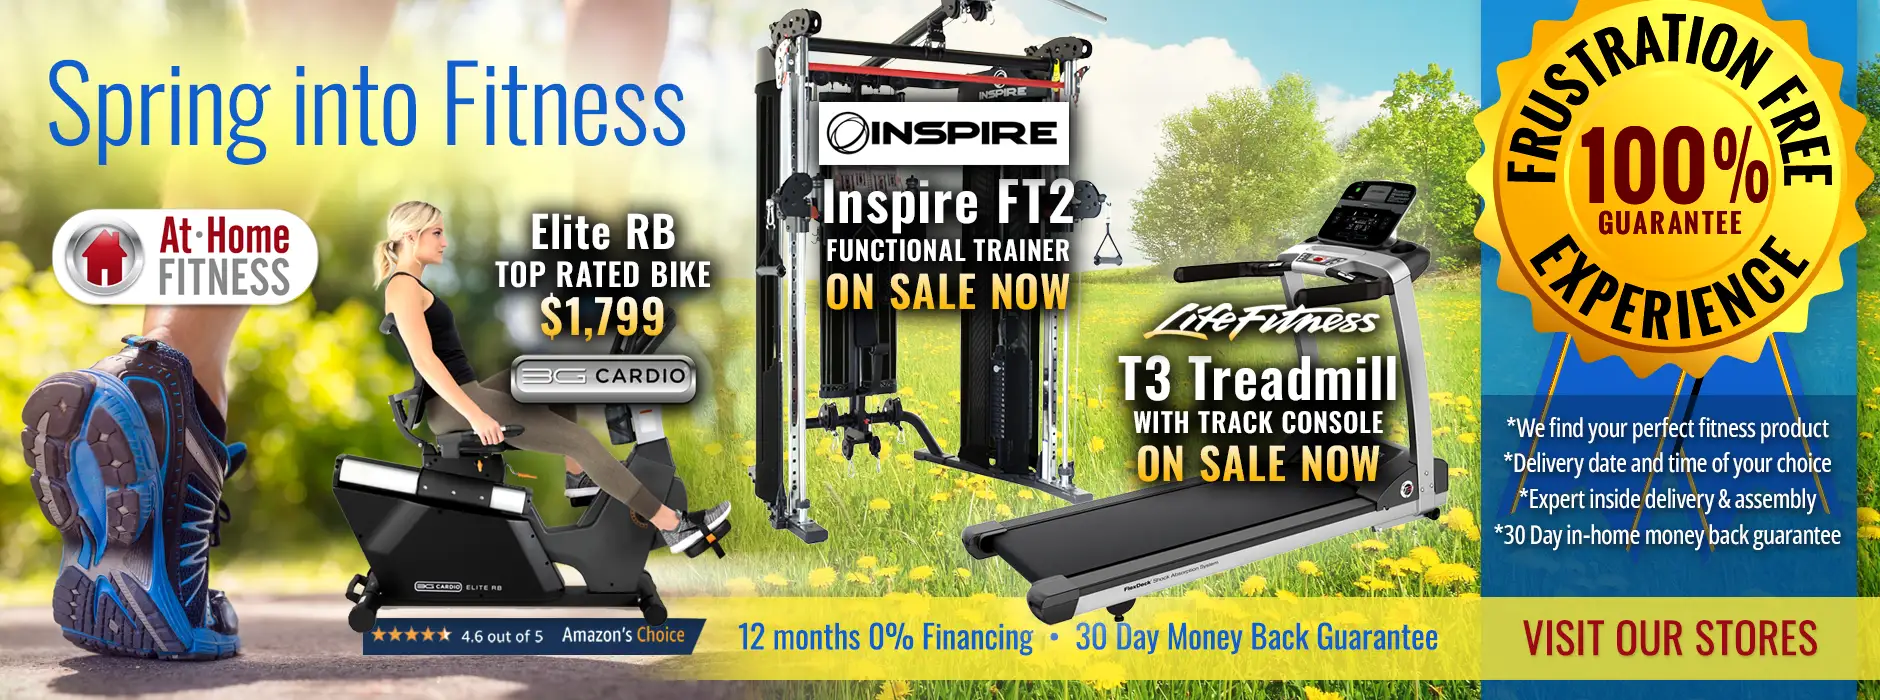 Spring into Fitness Sale from AtHomeFitness.com Phoenix Arizona Showrooms for Home Fitness Equipment